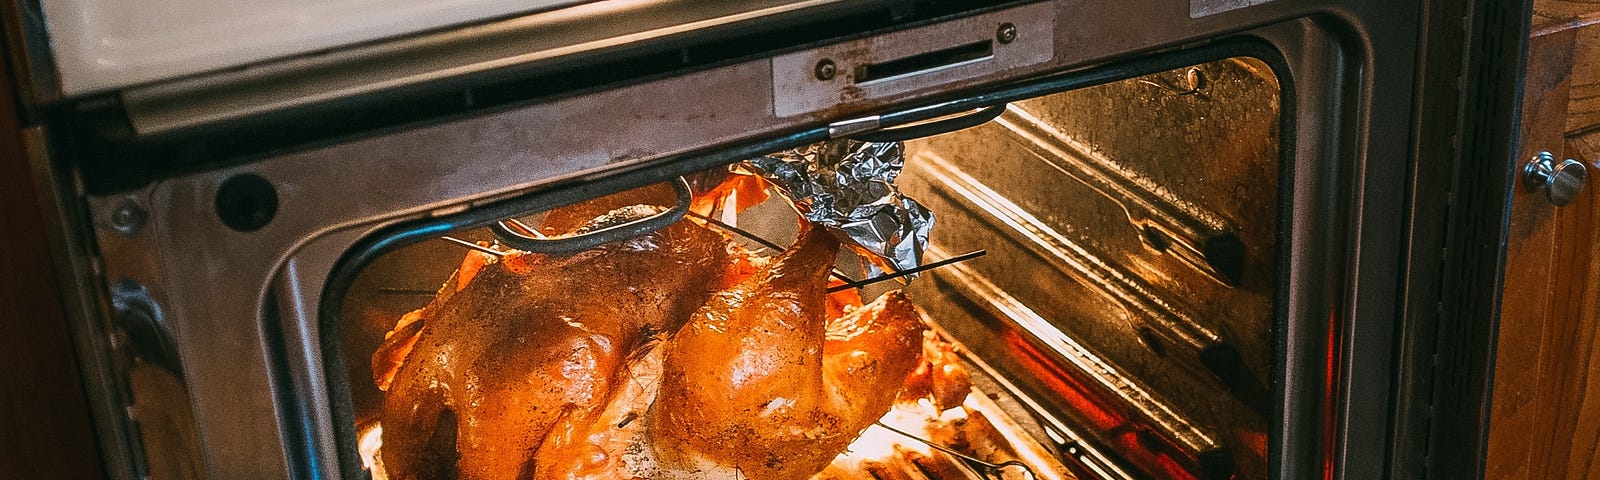 An open oven, with hot elements and a roasting turkey inside